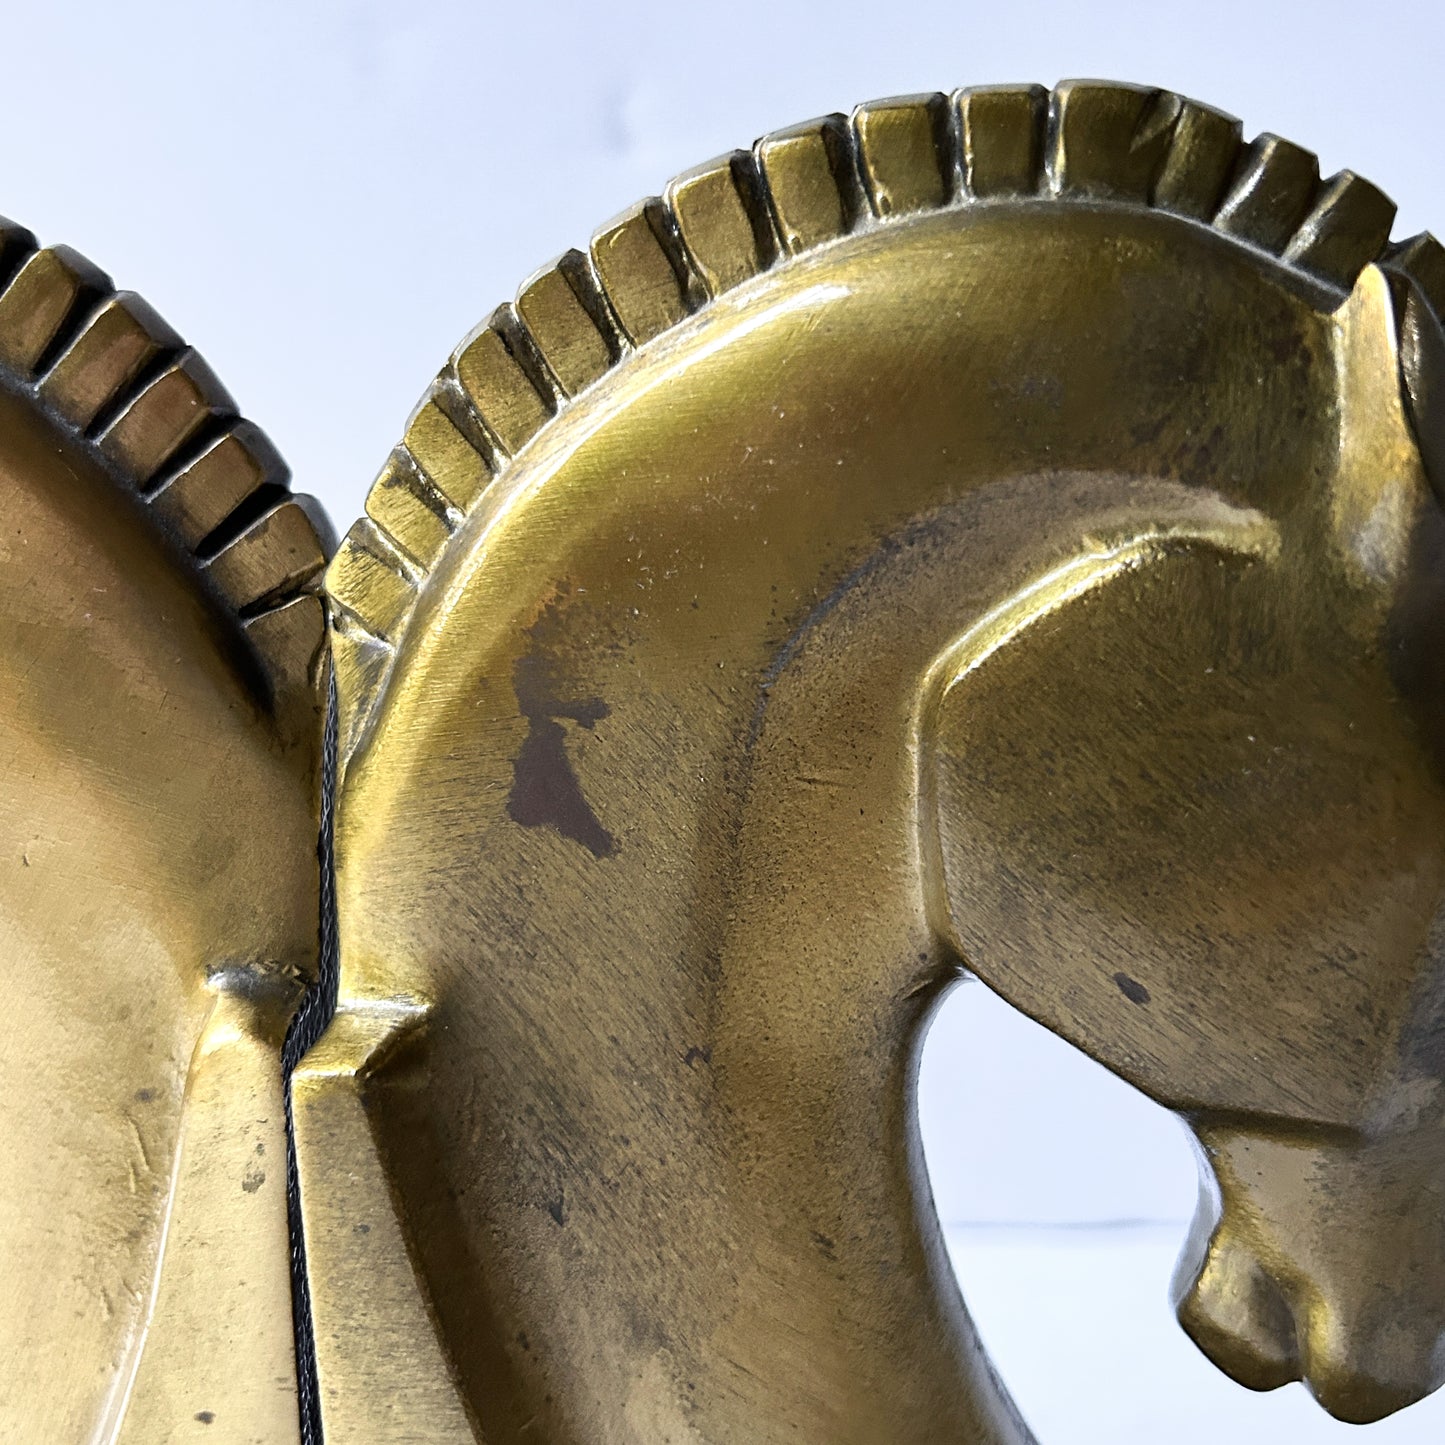 Vintage Art Deco Style Horse Head Bookends, Antiqued Brass Tone Lacquer Finish